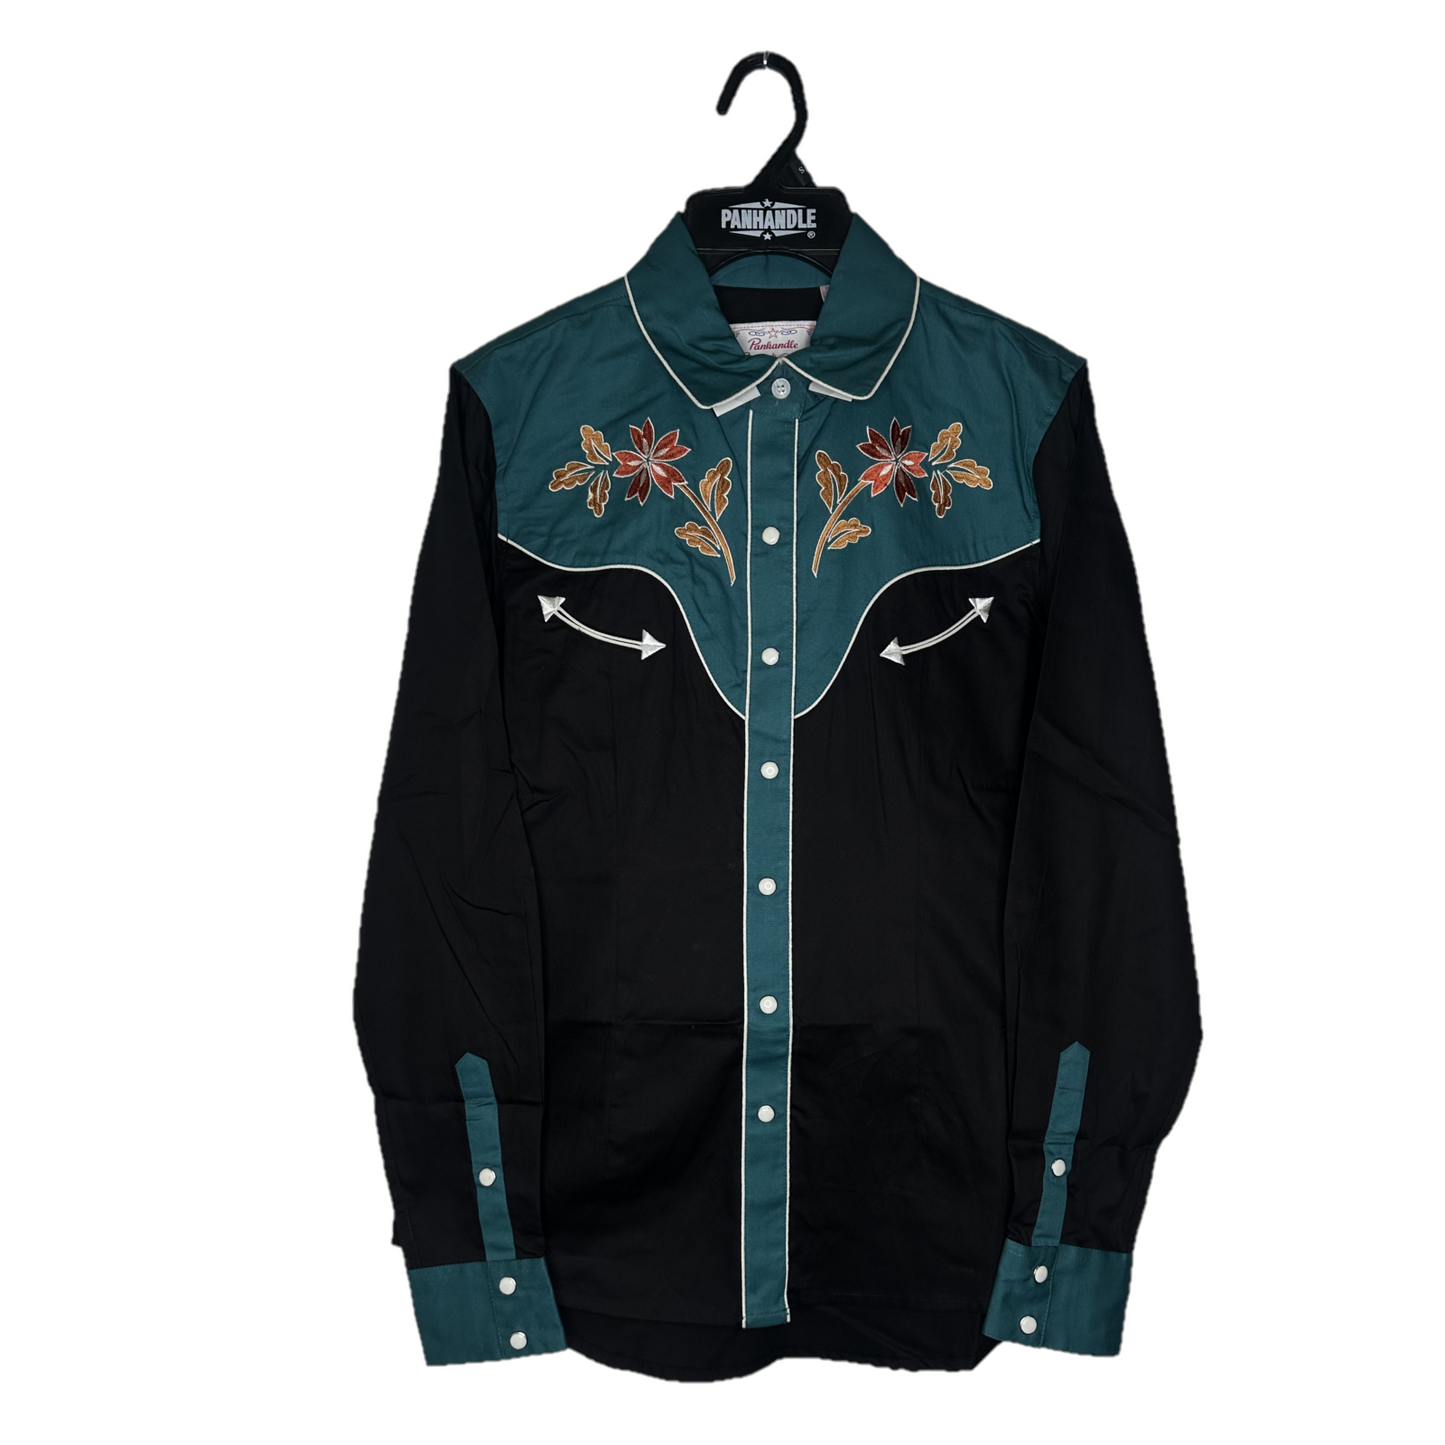 Panhandle Ladies Retro Embroidered Black & Turquoise Snap Western Shirt LWN2S02409